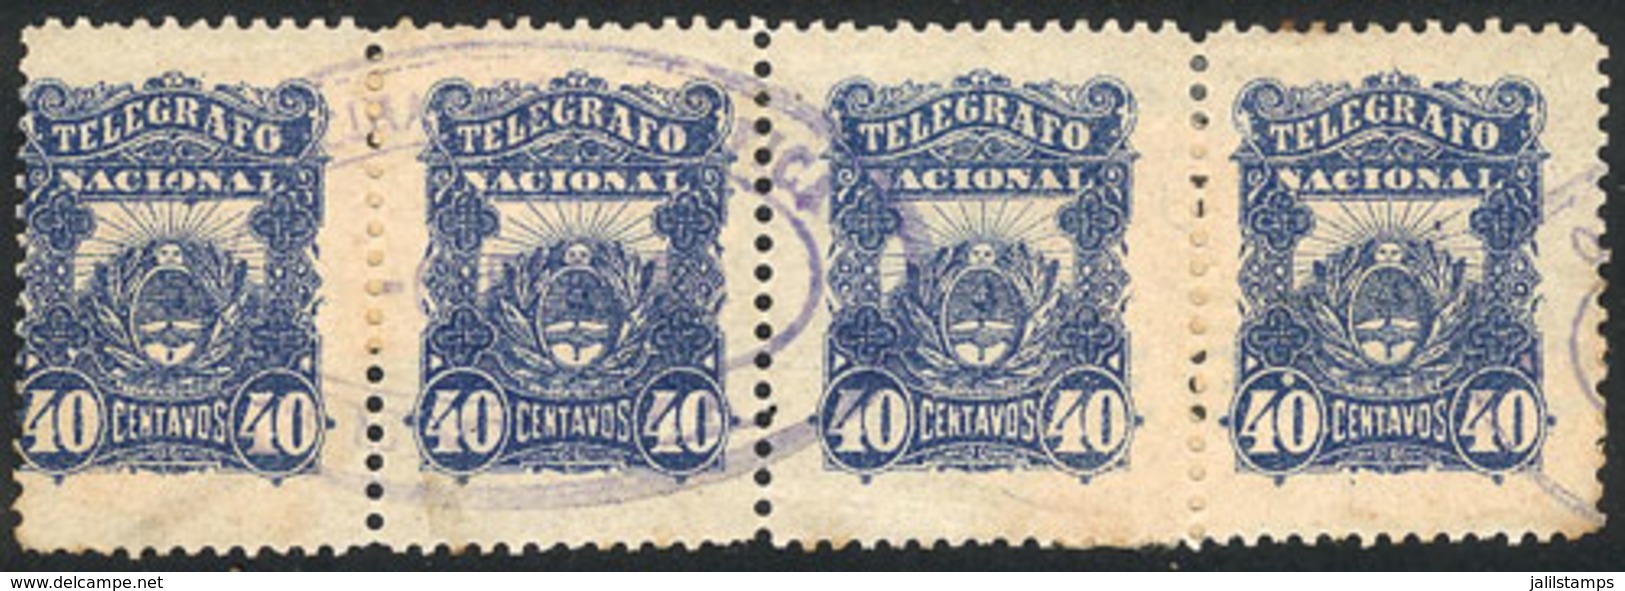 ARGENTINA: GJ.4, Beautiful Used Strip Of 4 Stamps, VF Quality, Rare Multiple! - Telégrafo